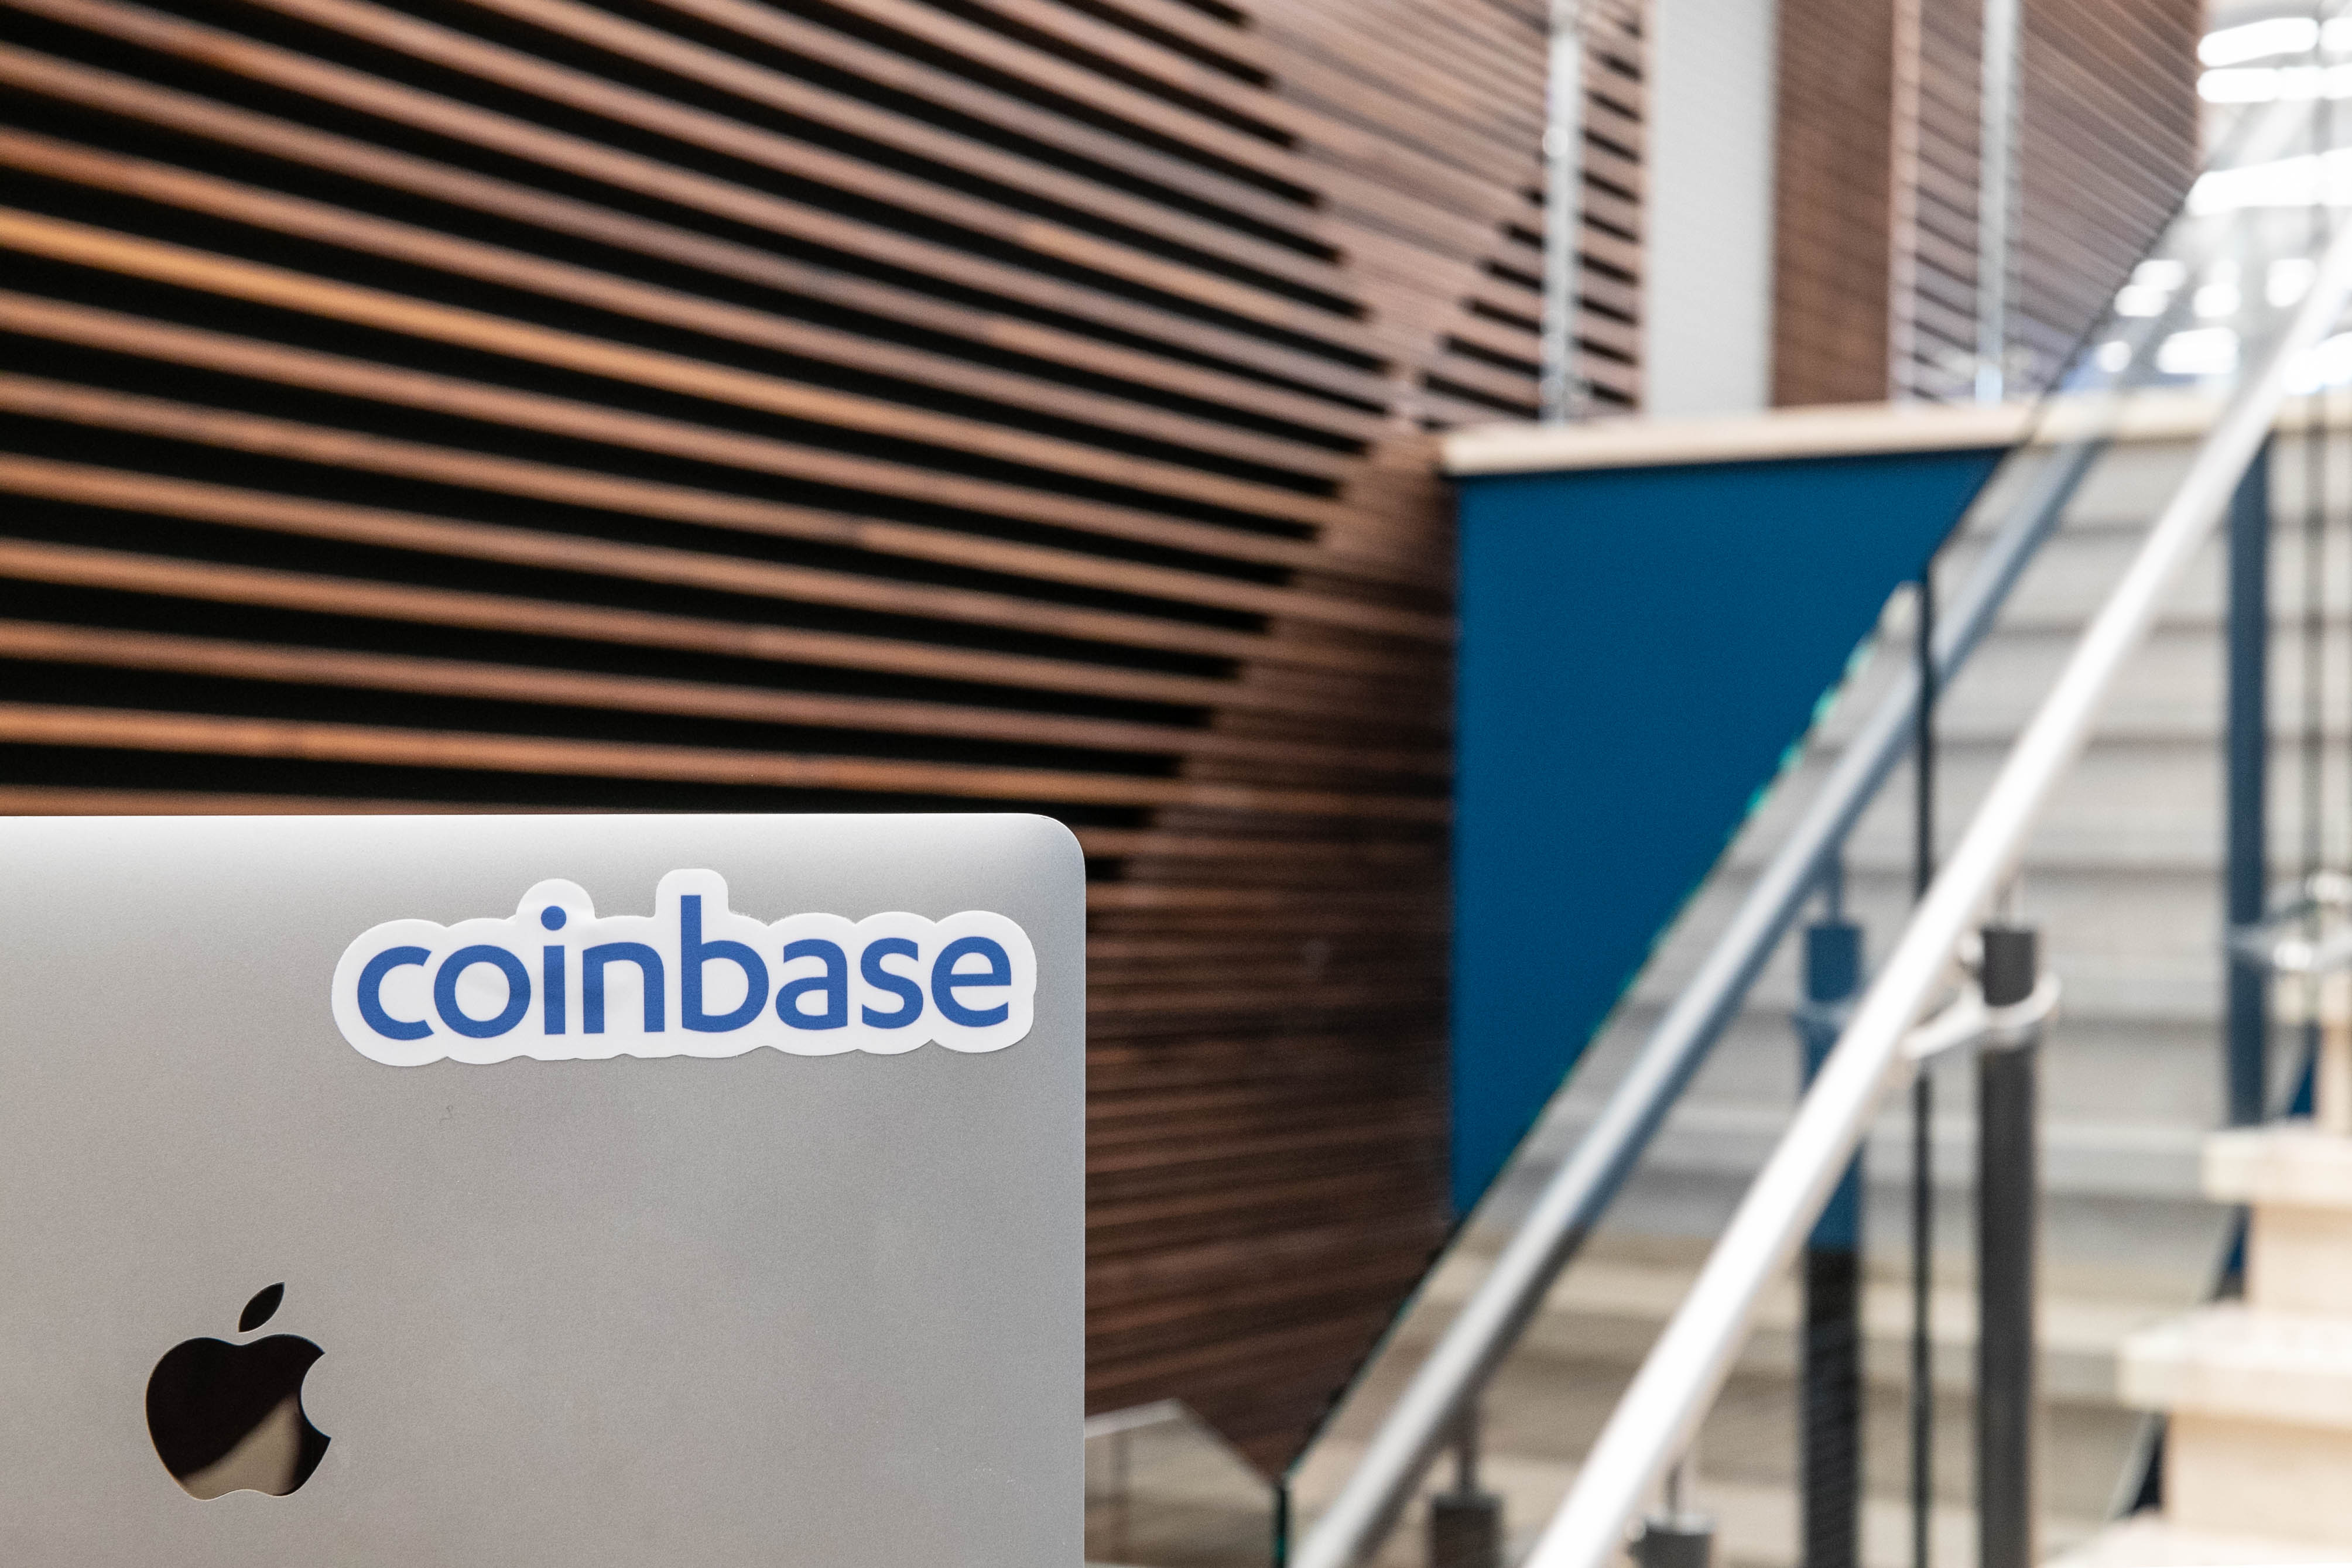 Coinbase Plans To List Every Legal Crypto Asset, CEO Says